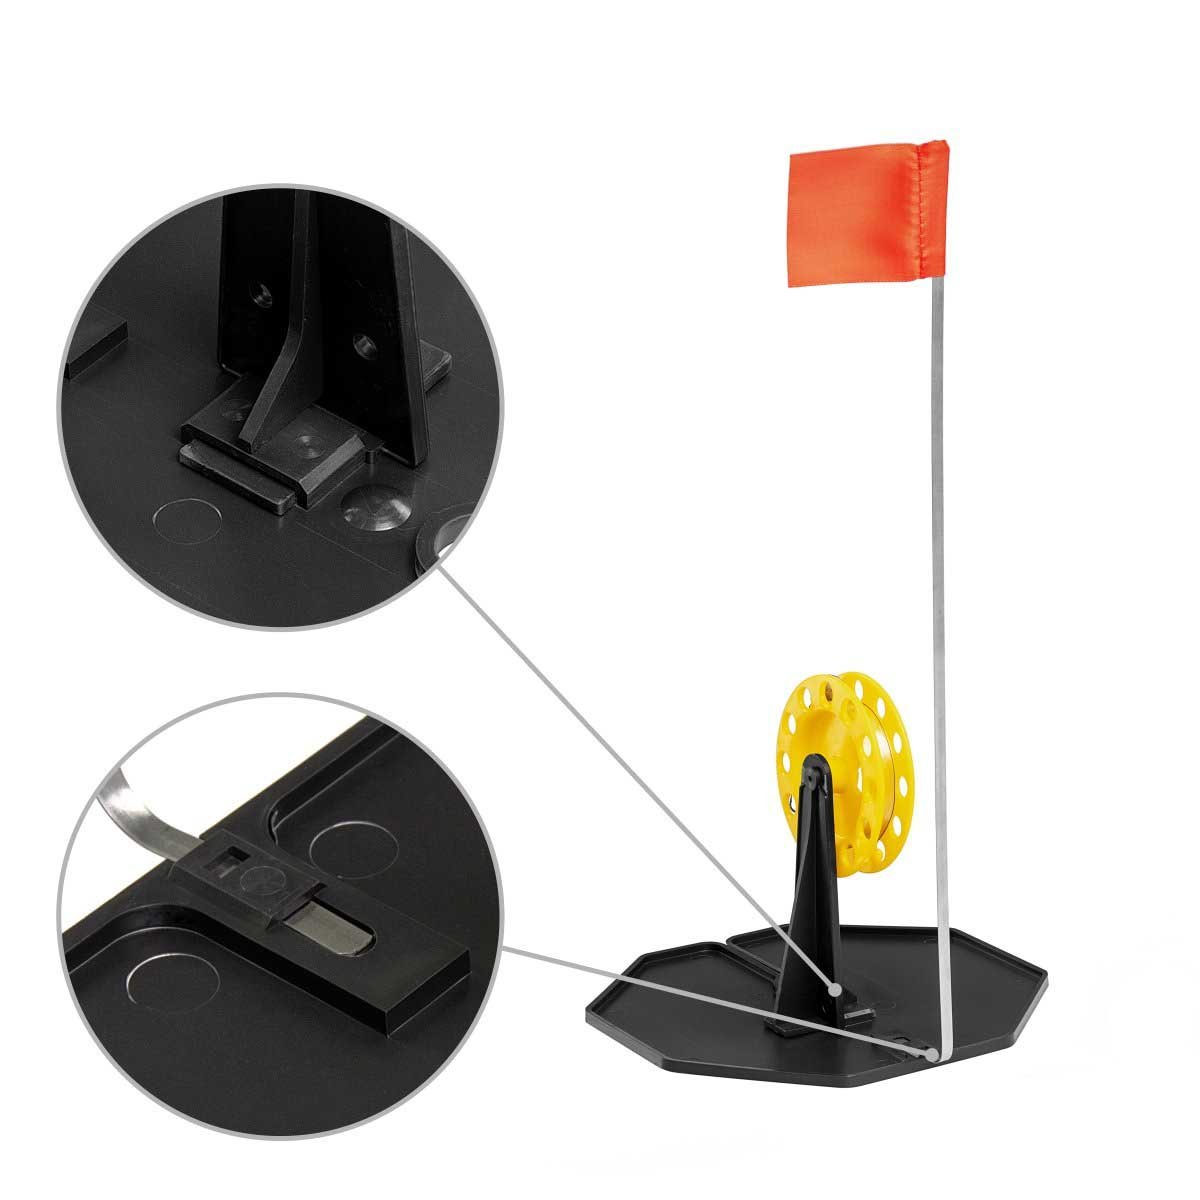 The flag shaft is reliably fixed at the base of Equipped Tip-up Pop-Up Integrated Hole-Cover Easy to Clip 50 ft